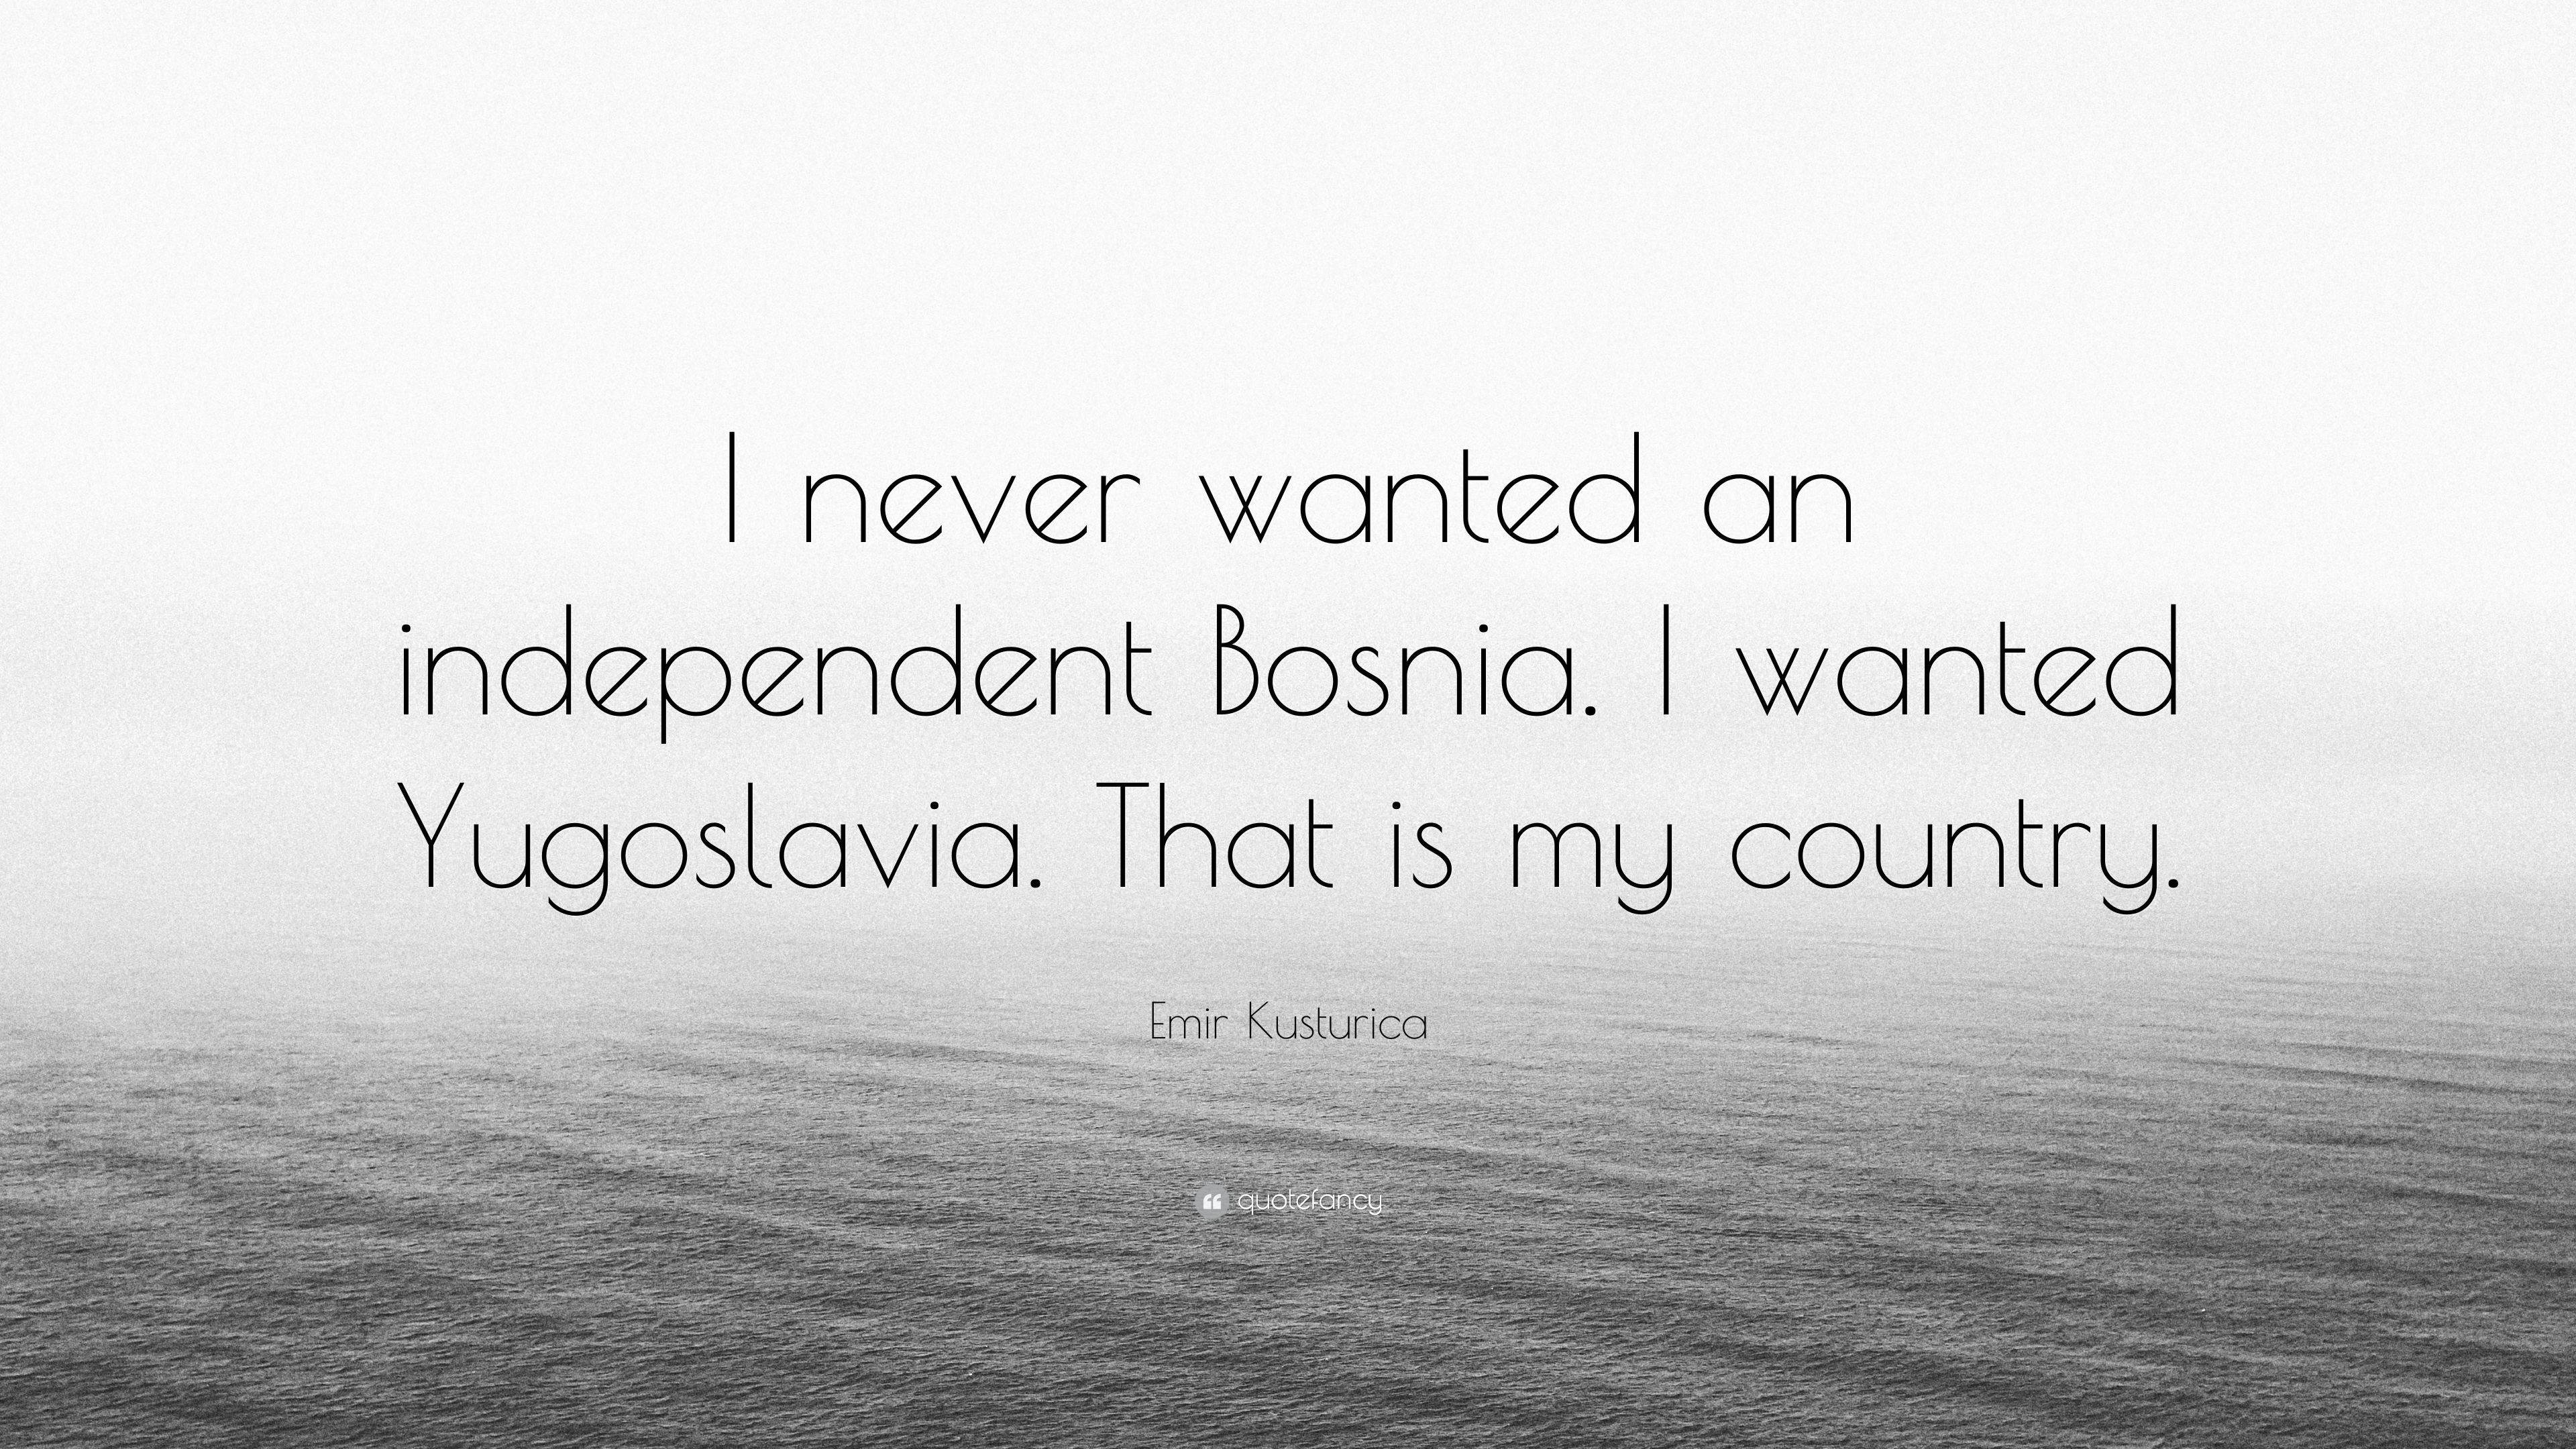 Emir Kusturica Quote: “I never wanted an independent Bosnia. I